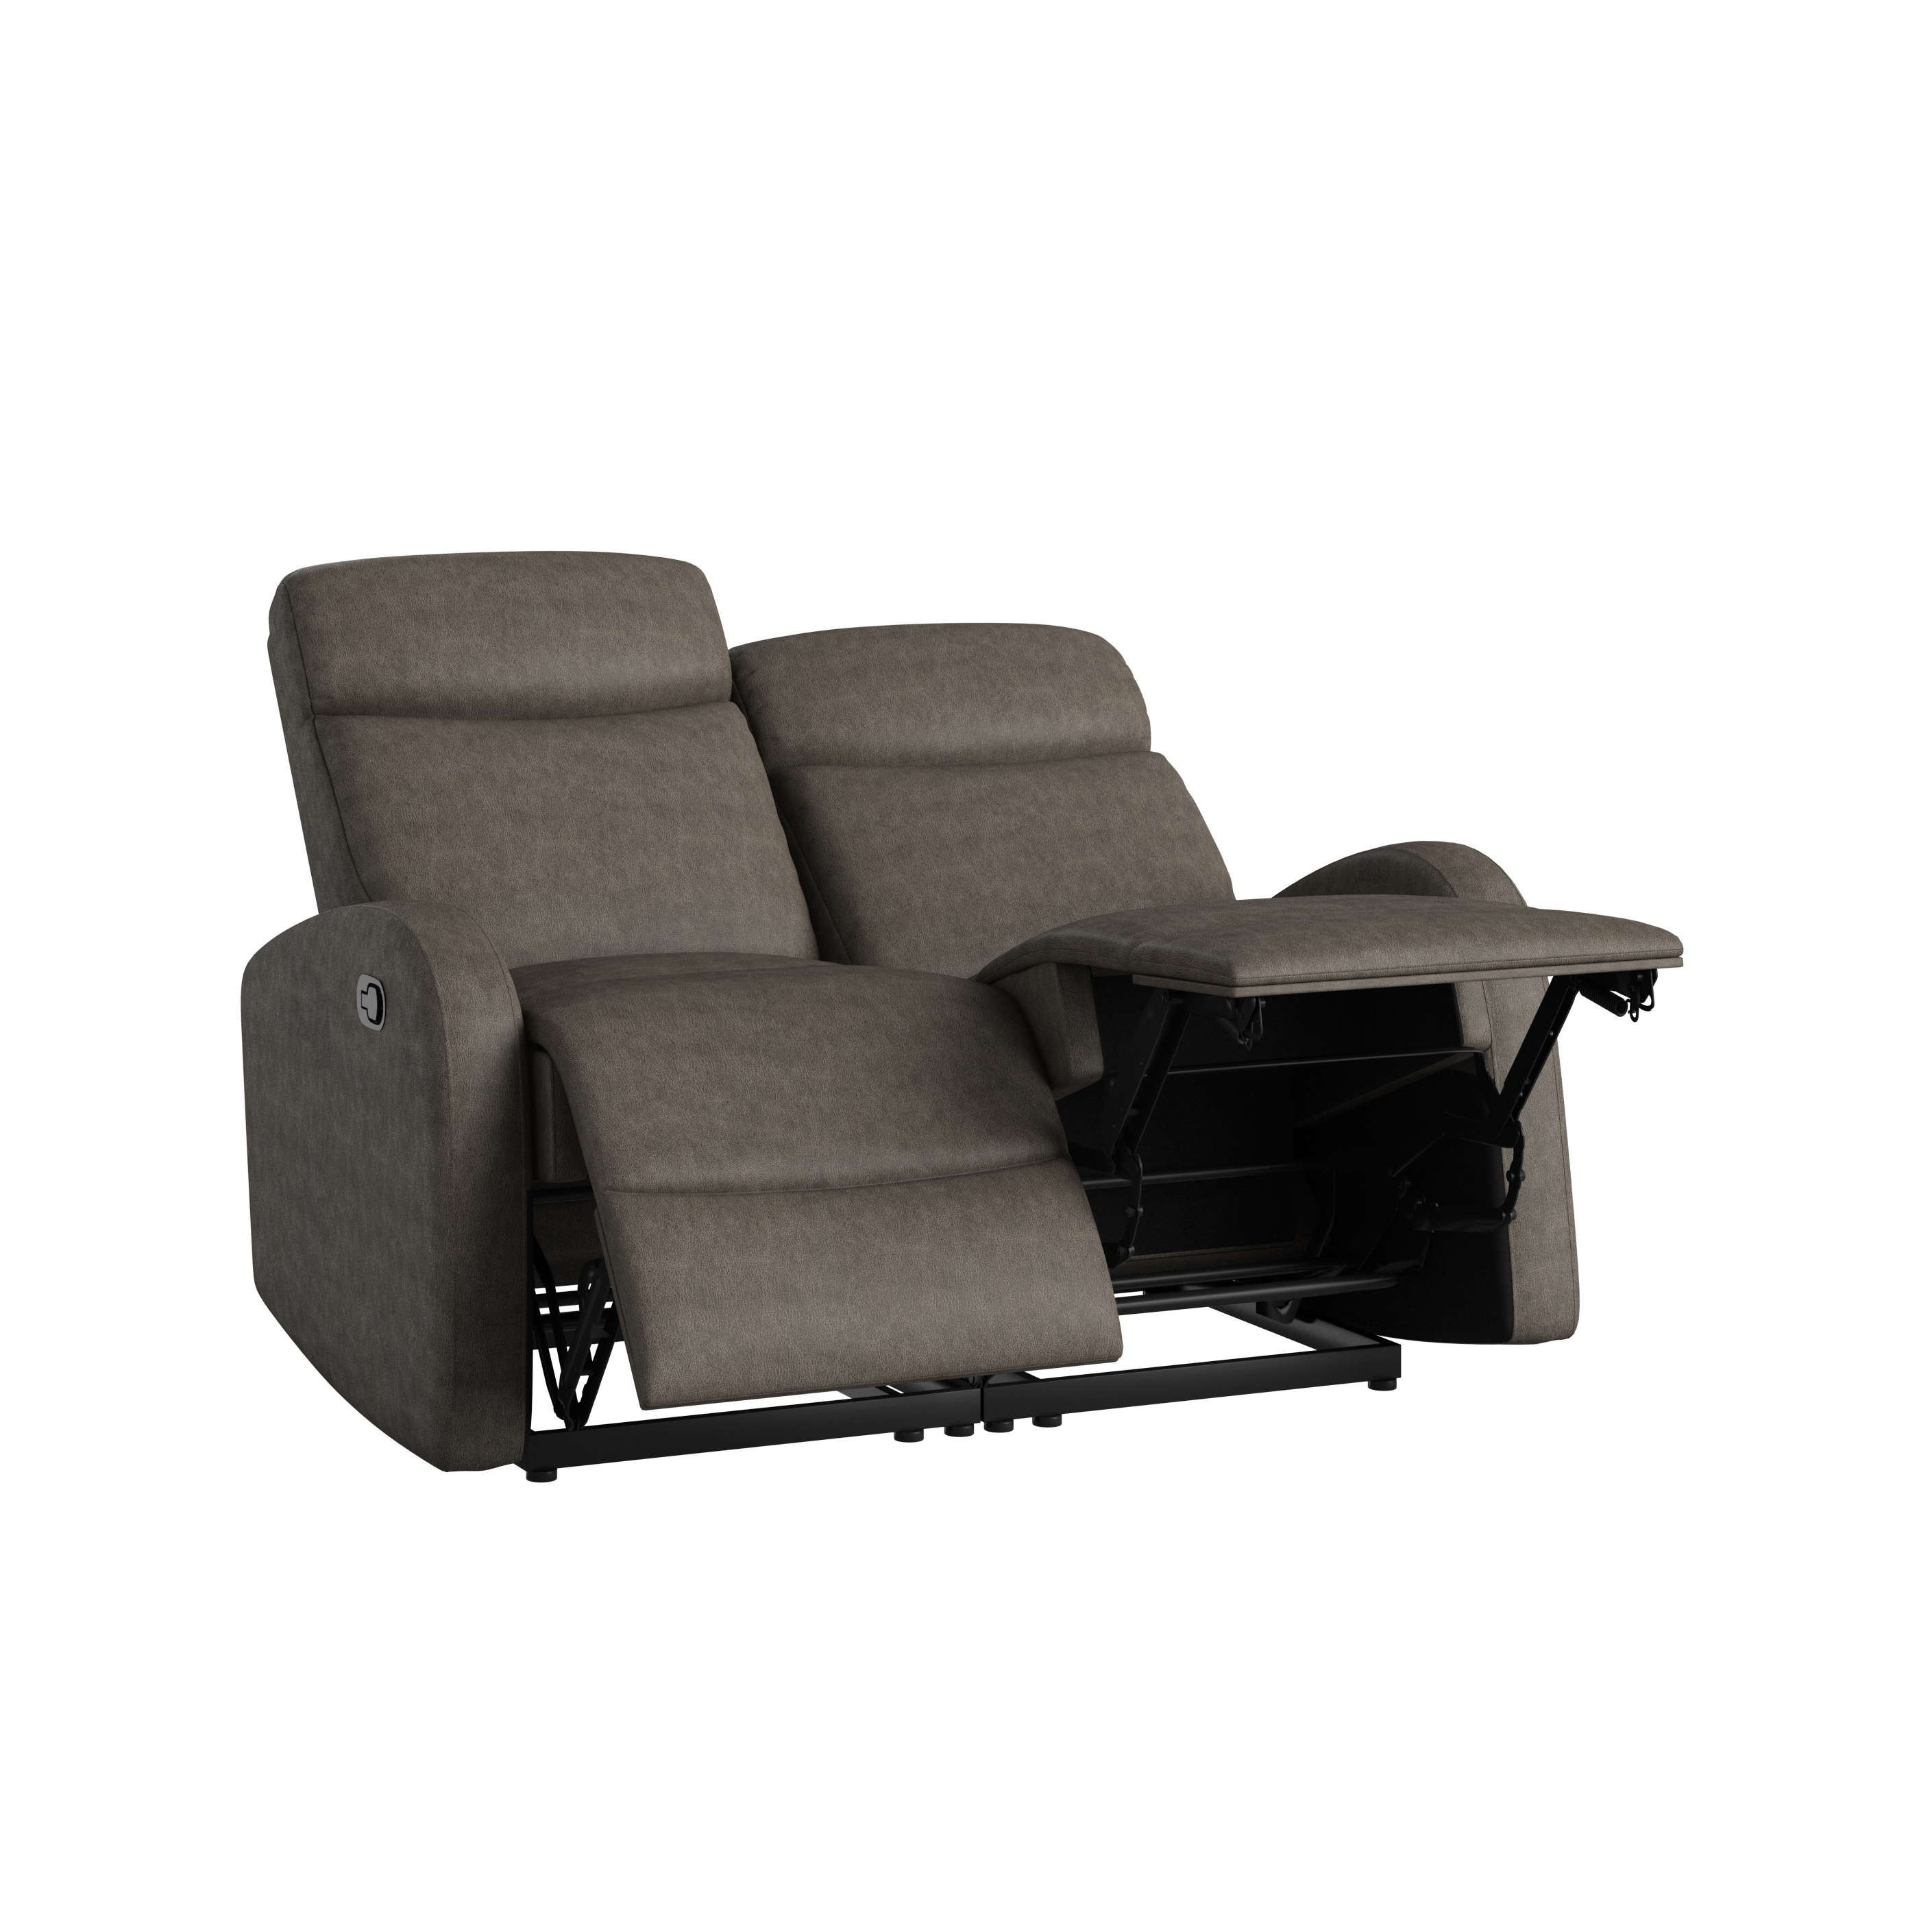 ProLounger Modular Recliner Loveseat in Distressed Faux Leather